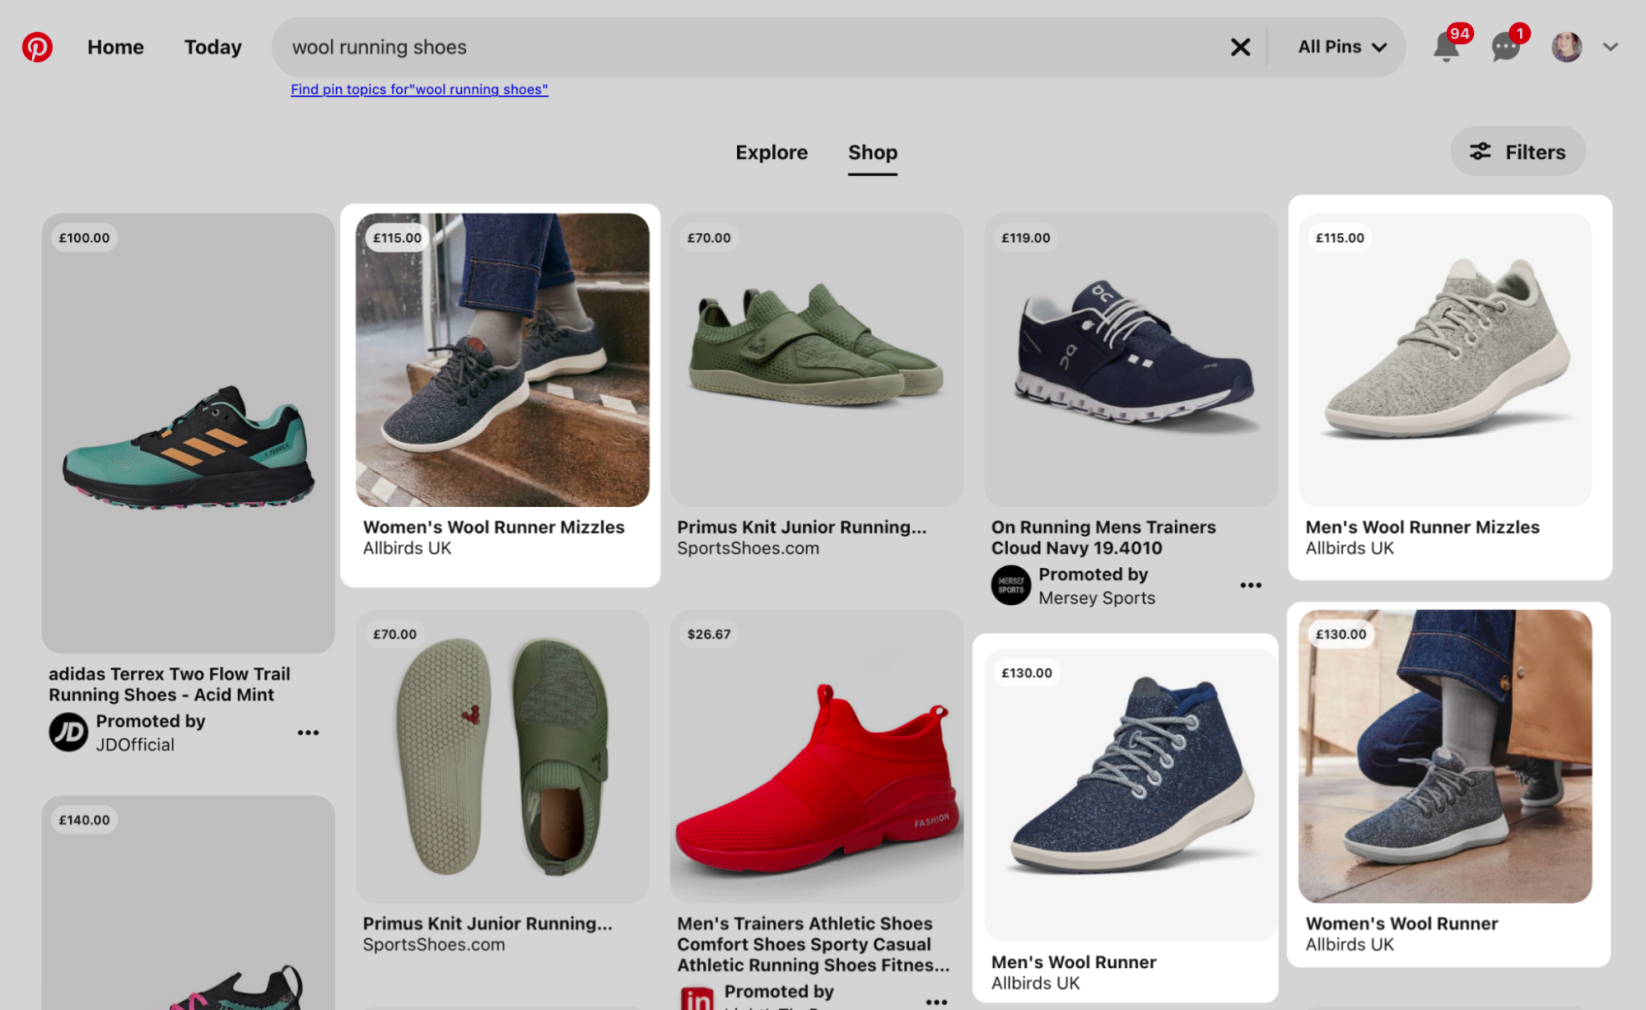 Pinterest search results for “wool running shoes” where Allbirds’ products appear four times.